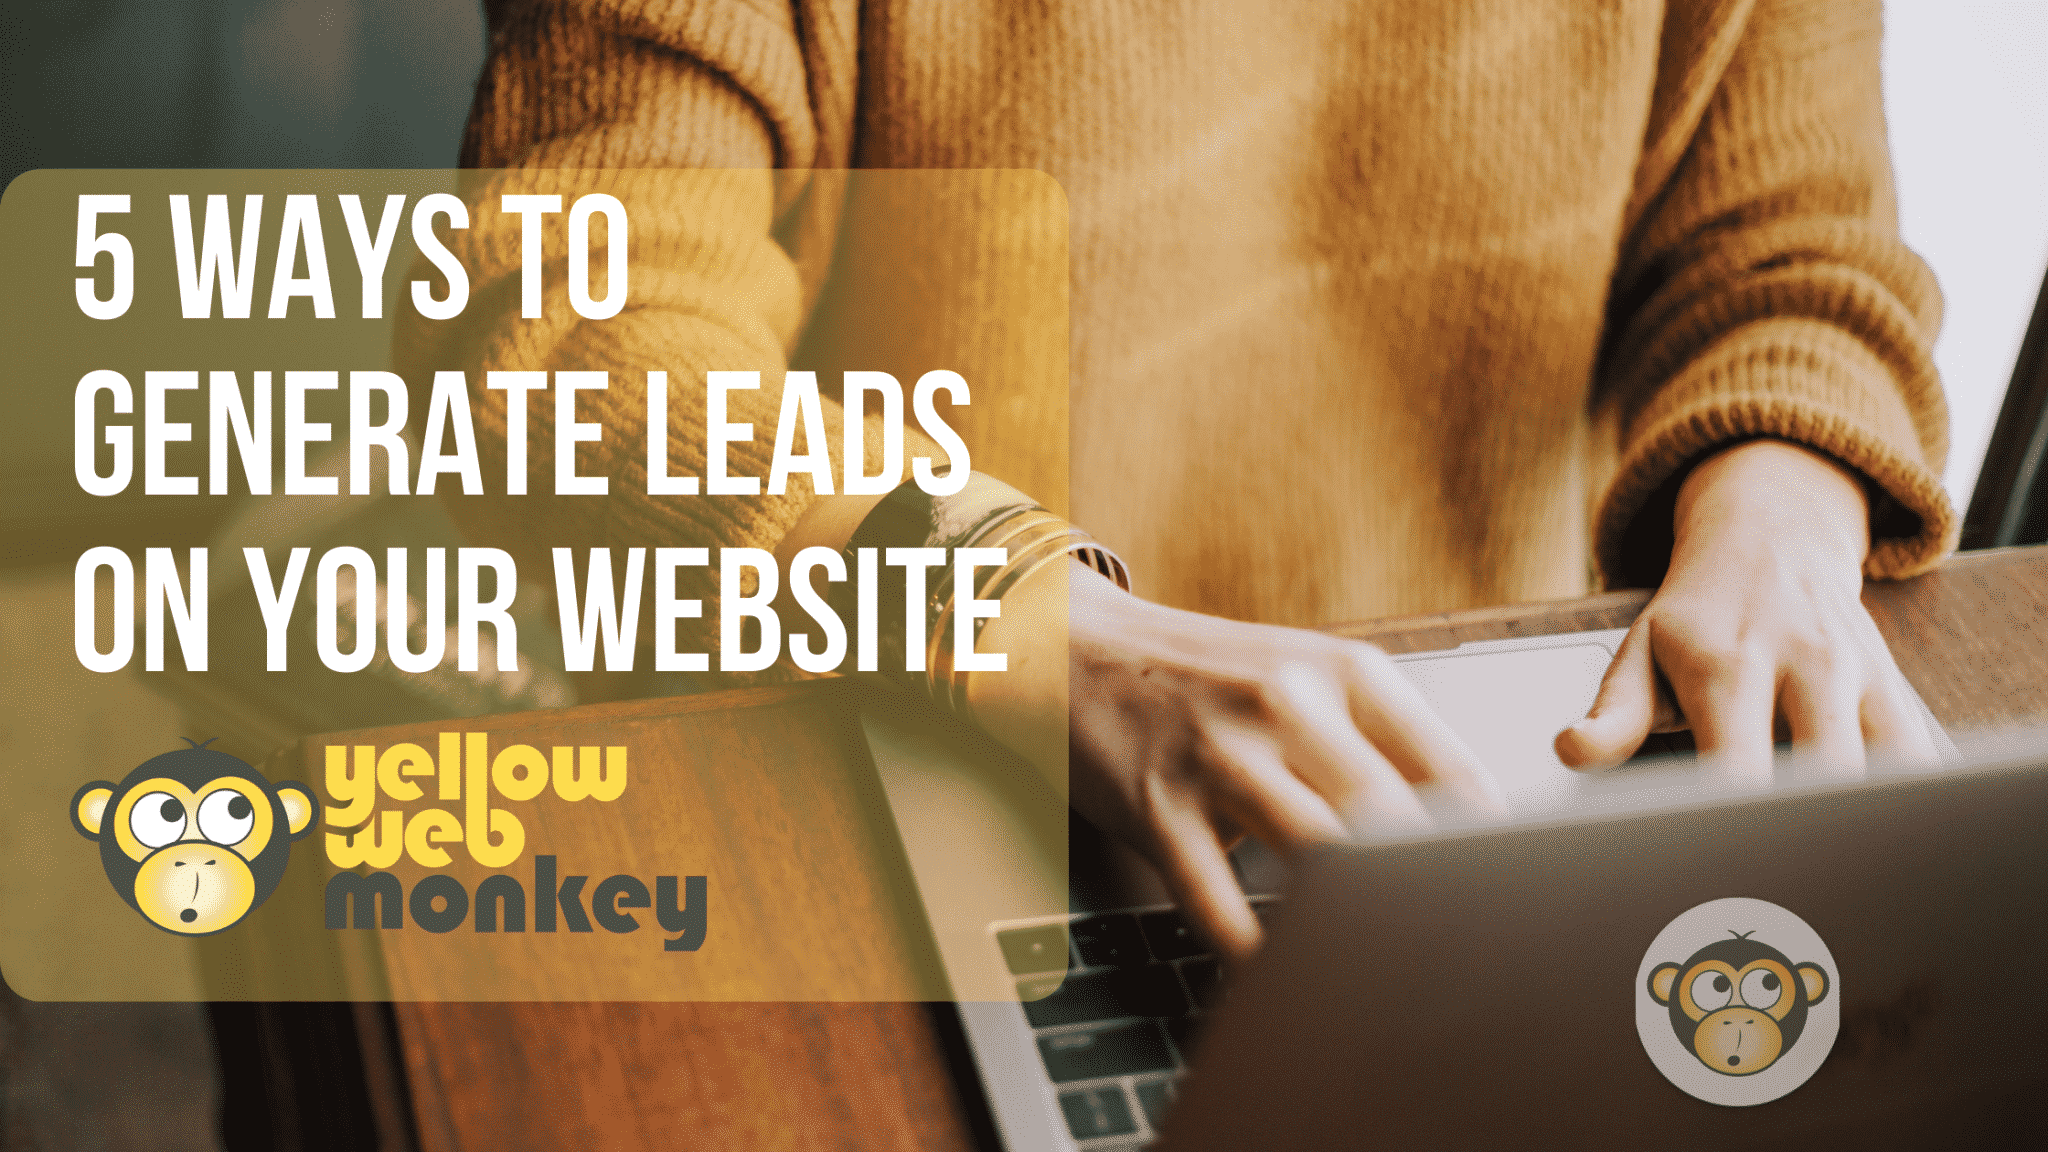 5 ways to generate leads on your website